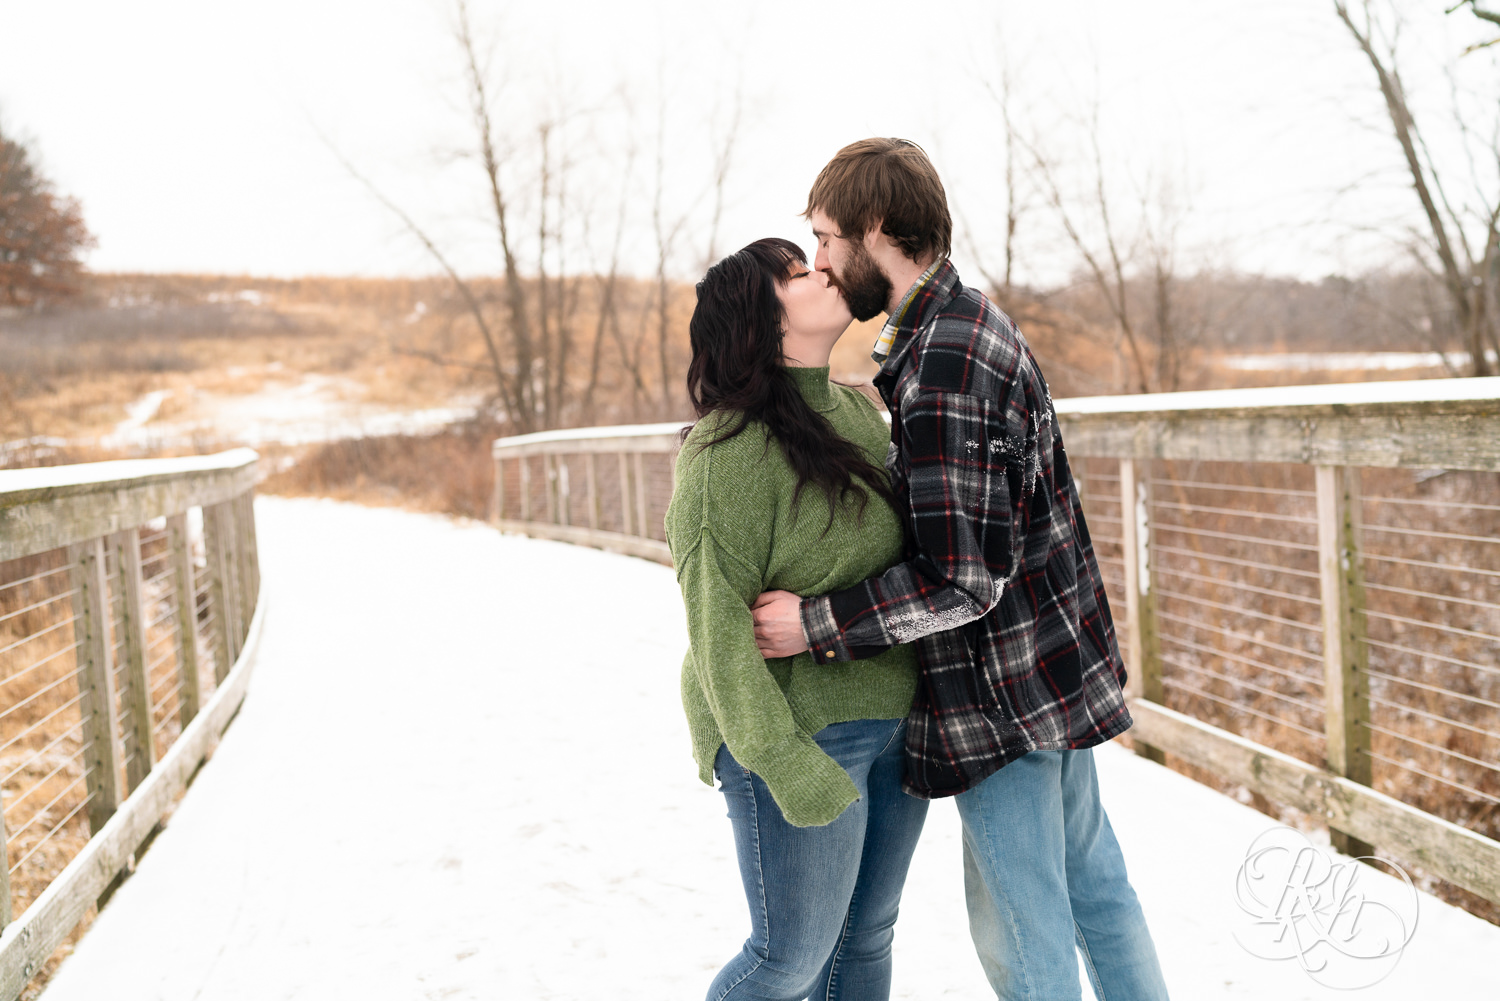 Man in flannel and woman in green sweater and jeans kiss on snowy bridge at Lebanon Hills in Eagan, Minnesota.